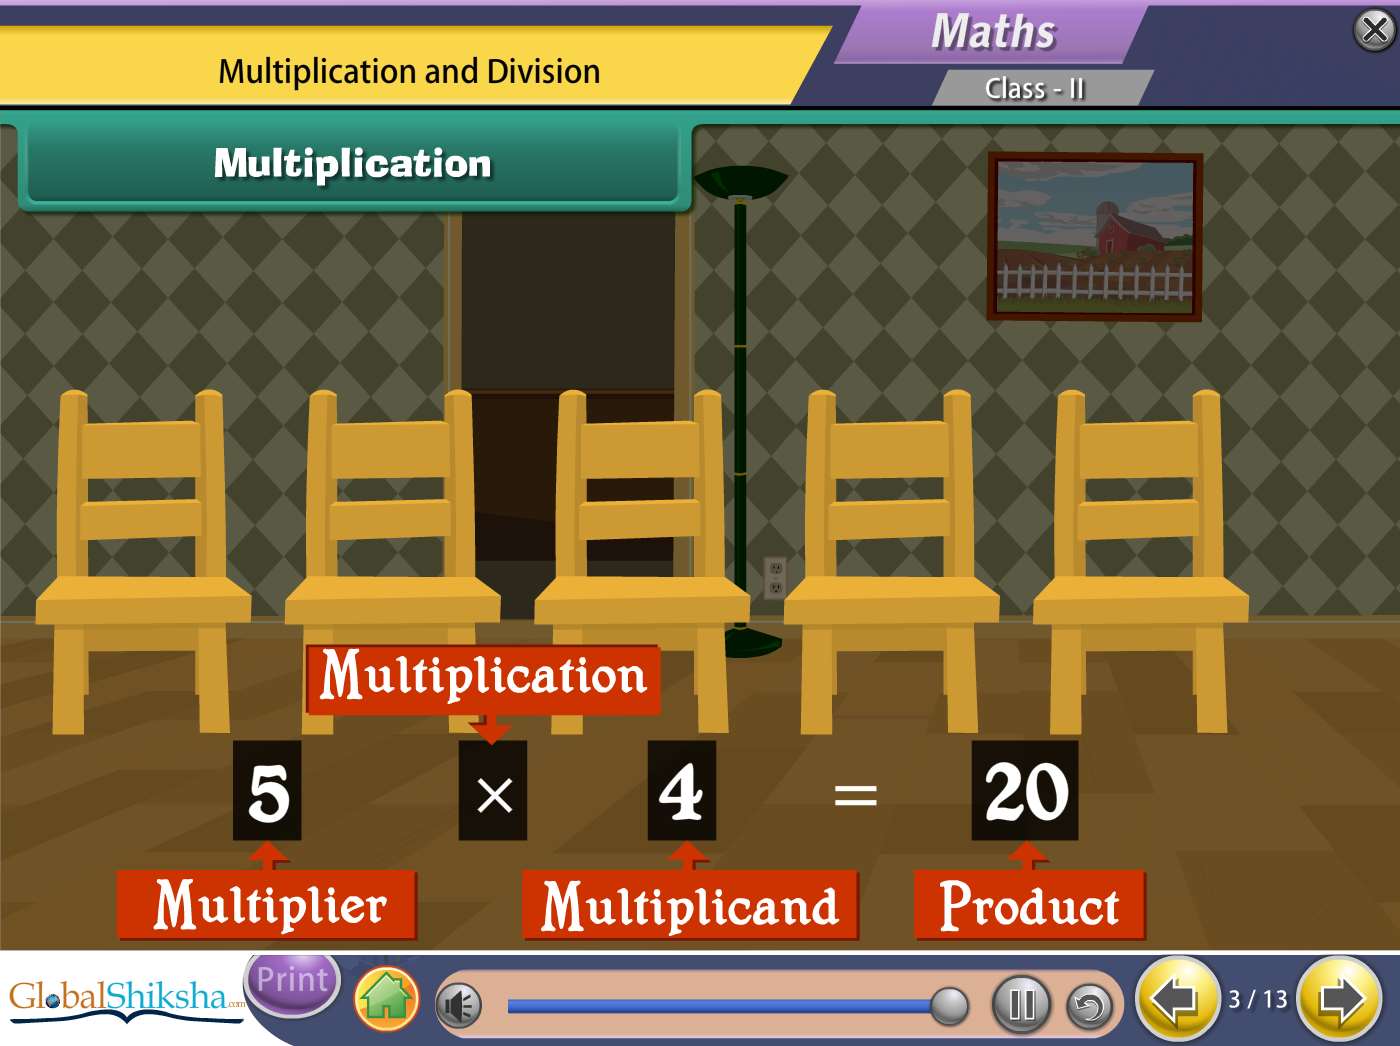 CBSE Class 2 Maths & Science Animated Pendrive in English